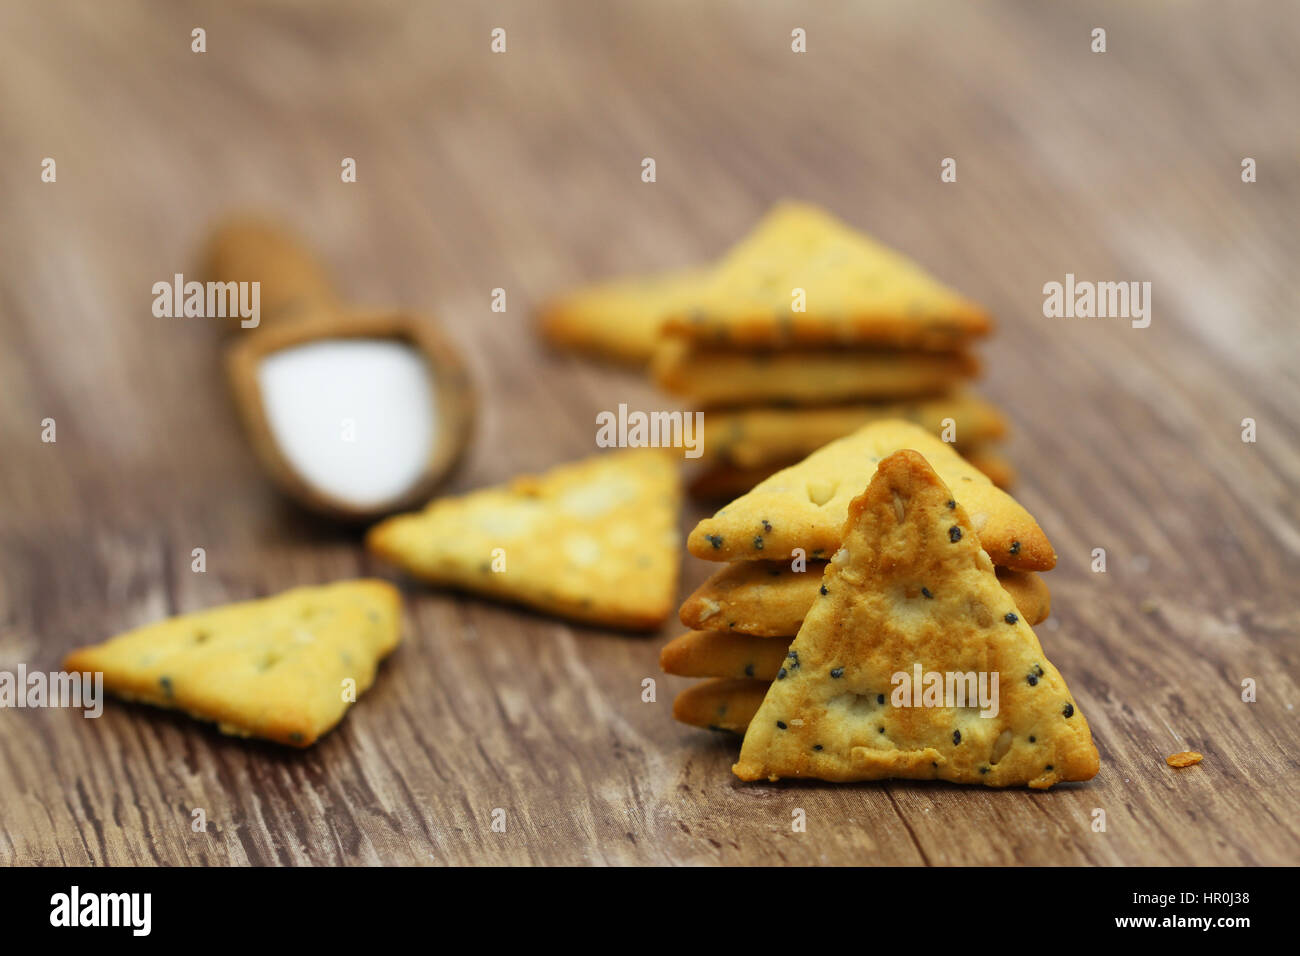 Salty snack triangles with poppy seed and sesame seeds on wooden surface Stock Photo